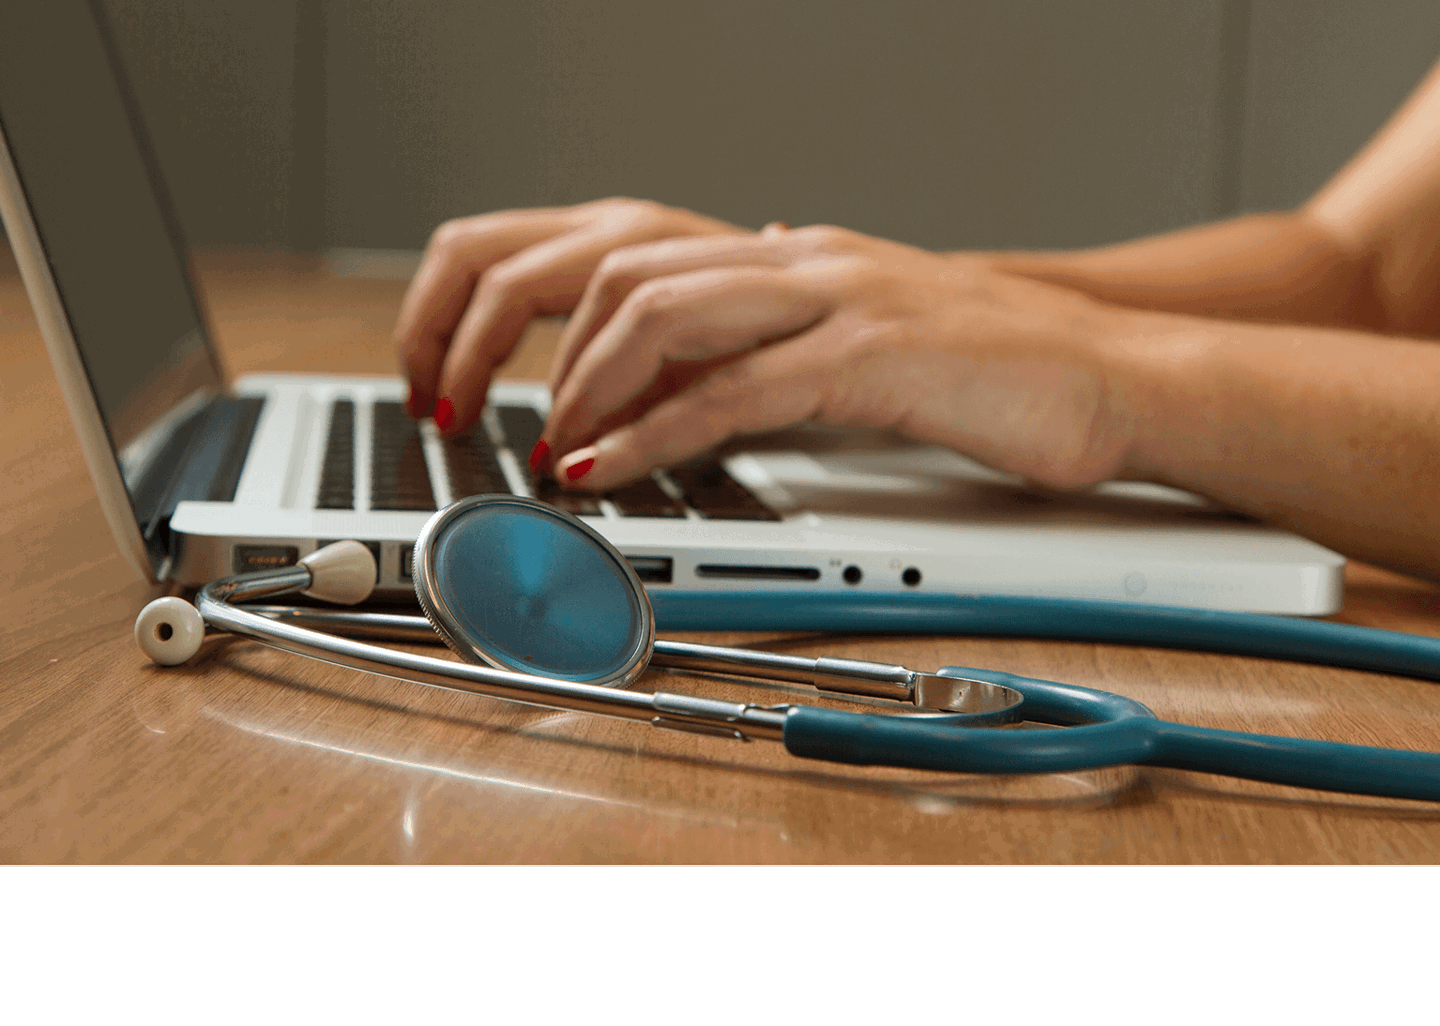 The image shows hands typing on a laptop with a stethoscope nearby, suggesting a healthcare professional at work.